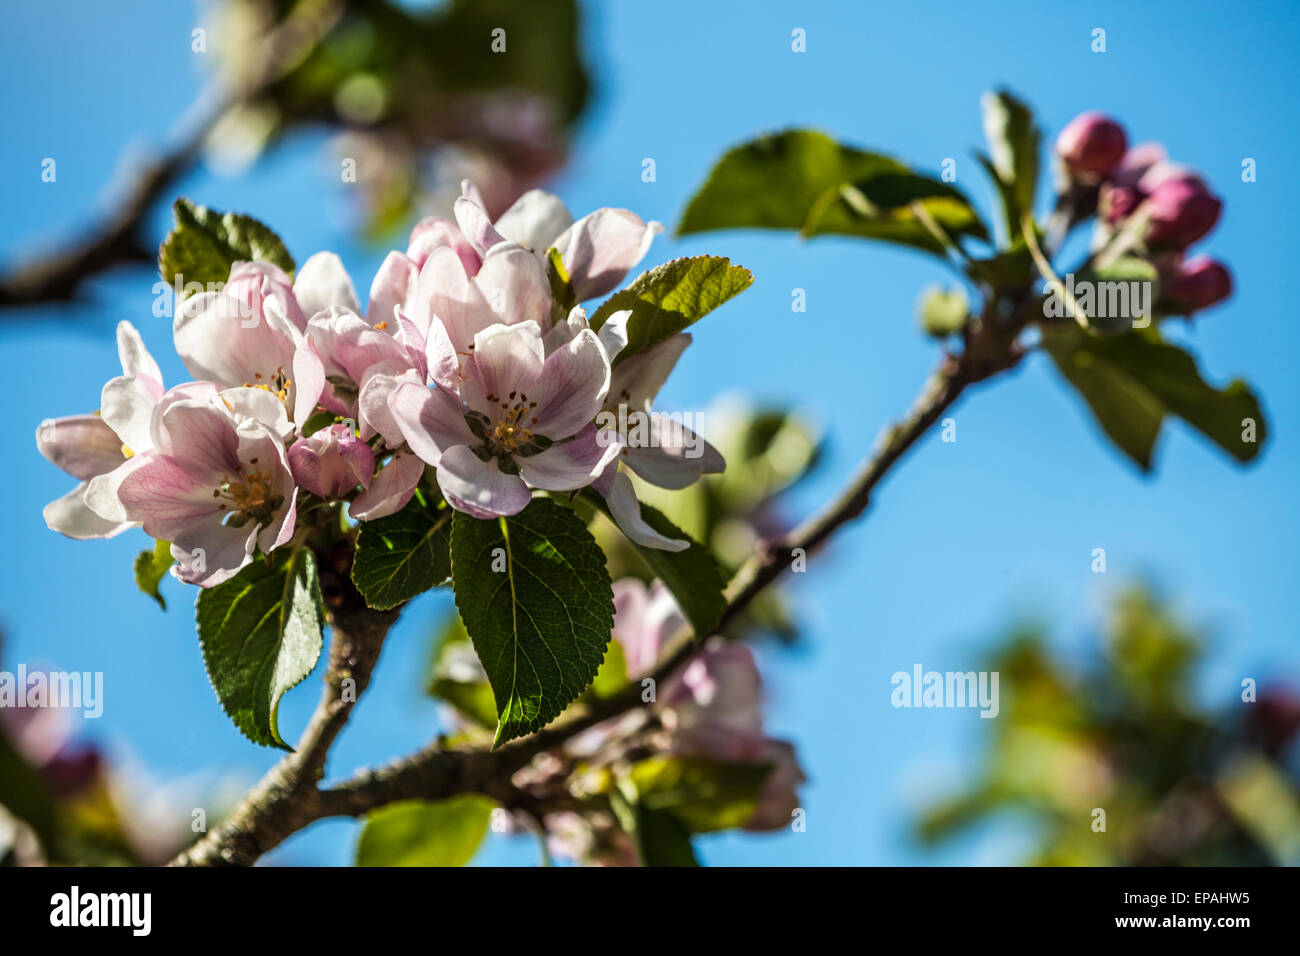 Blossoming apples trees in the wallled garden at Bowood House in Wiltshire. Stock Photo